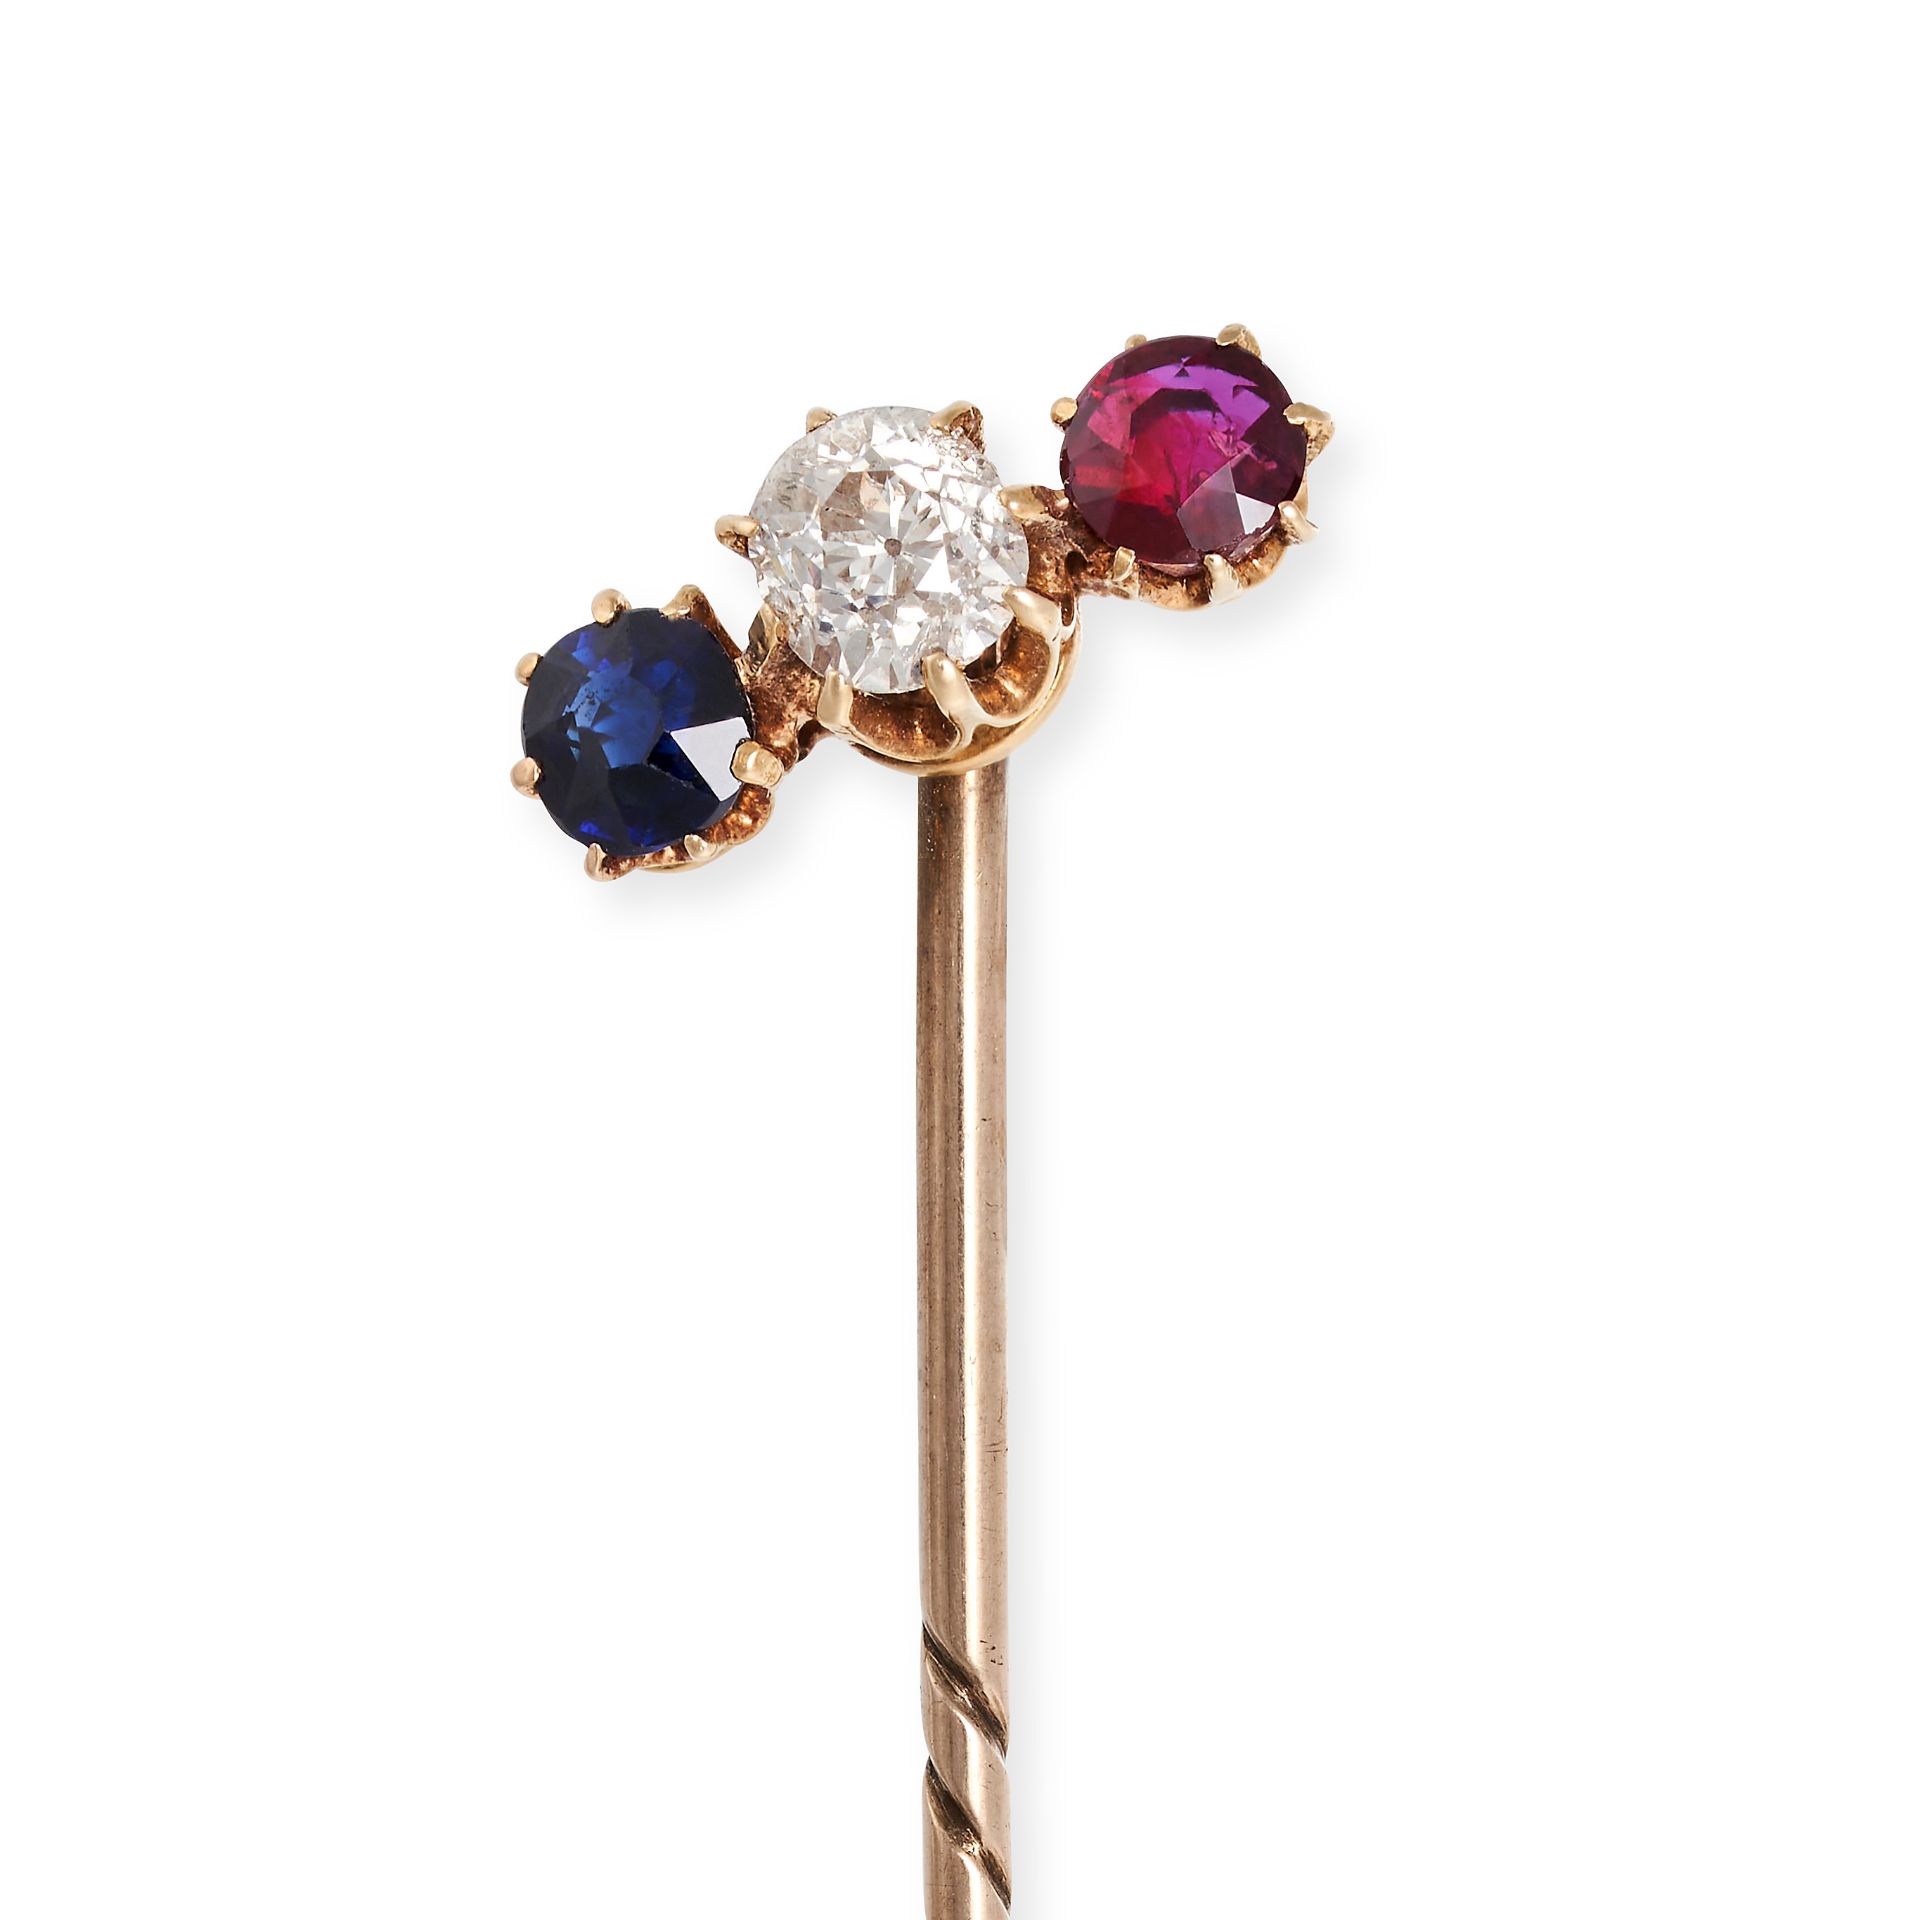 NO RESERVE - AN ANTIQUE SAPPHIRE, DIAMOND AND RUBY TIE / STICK PIN in yellow gold, set with an ol...